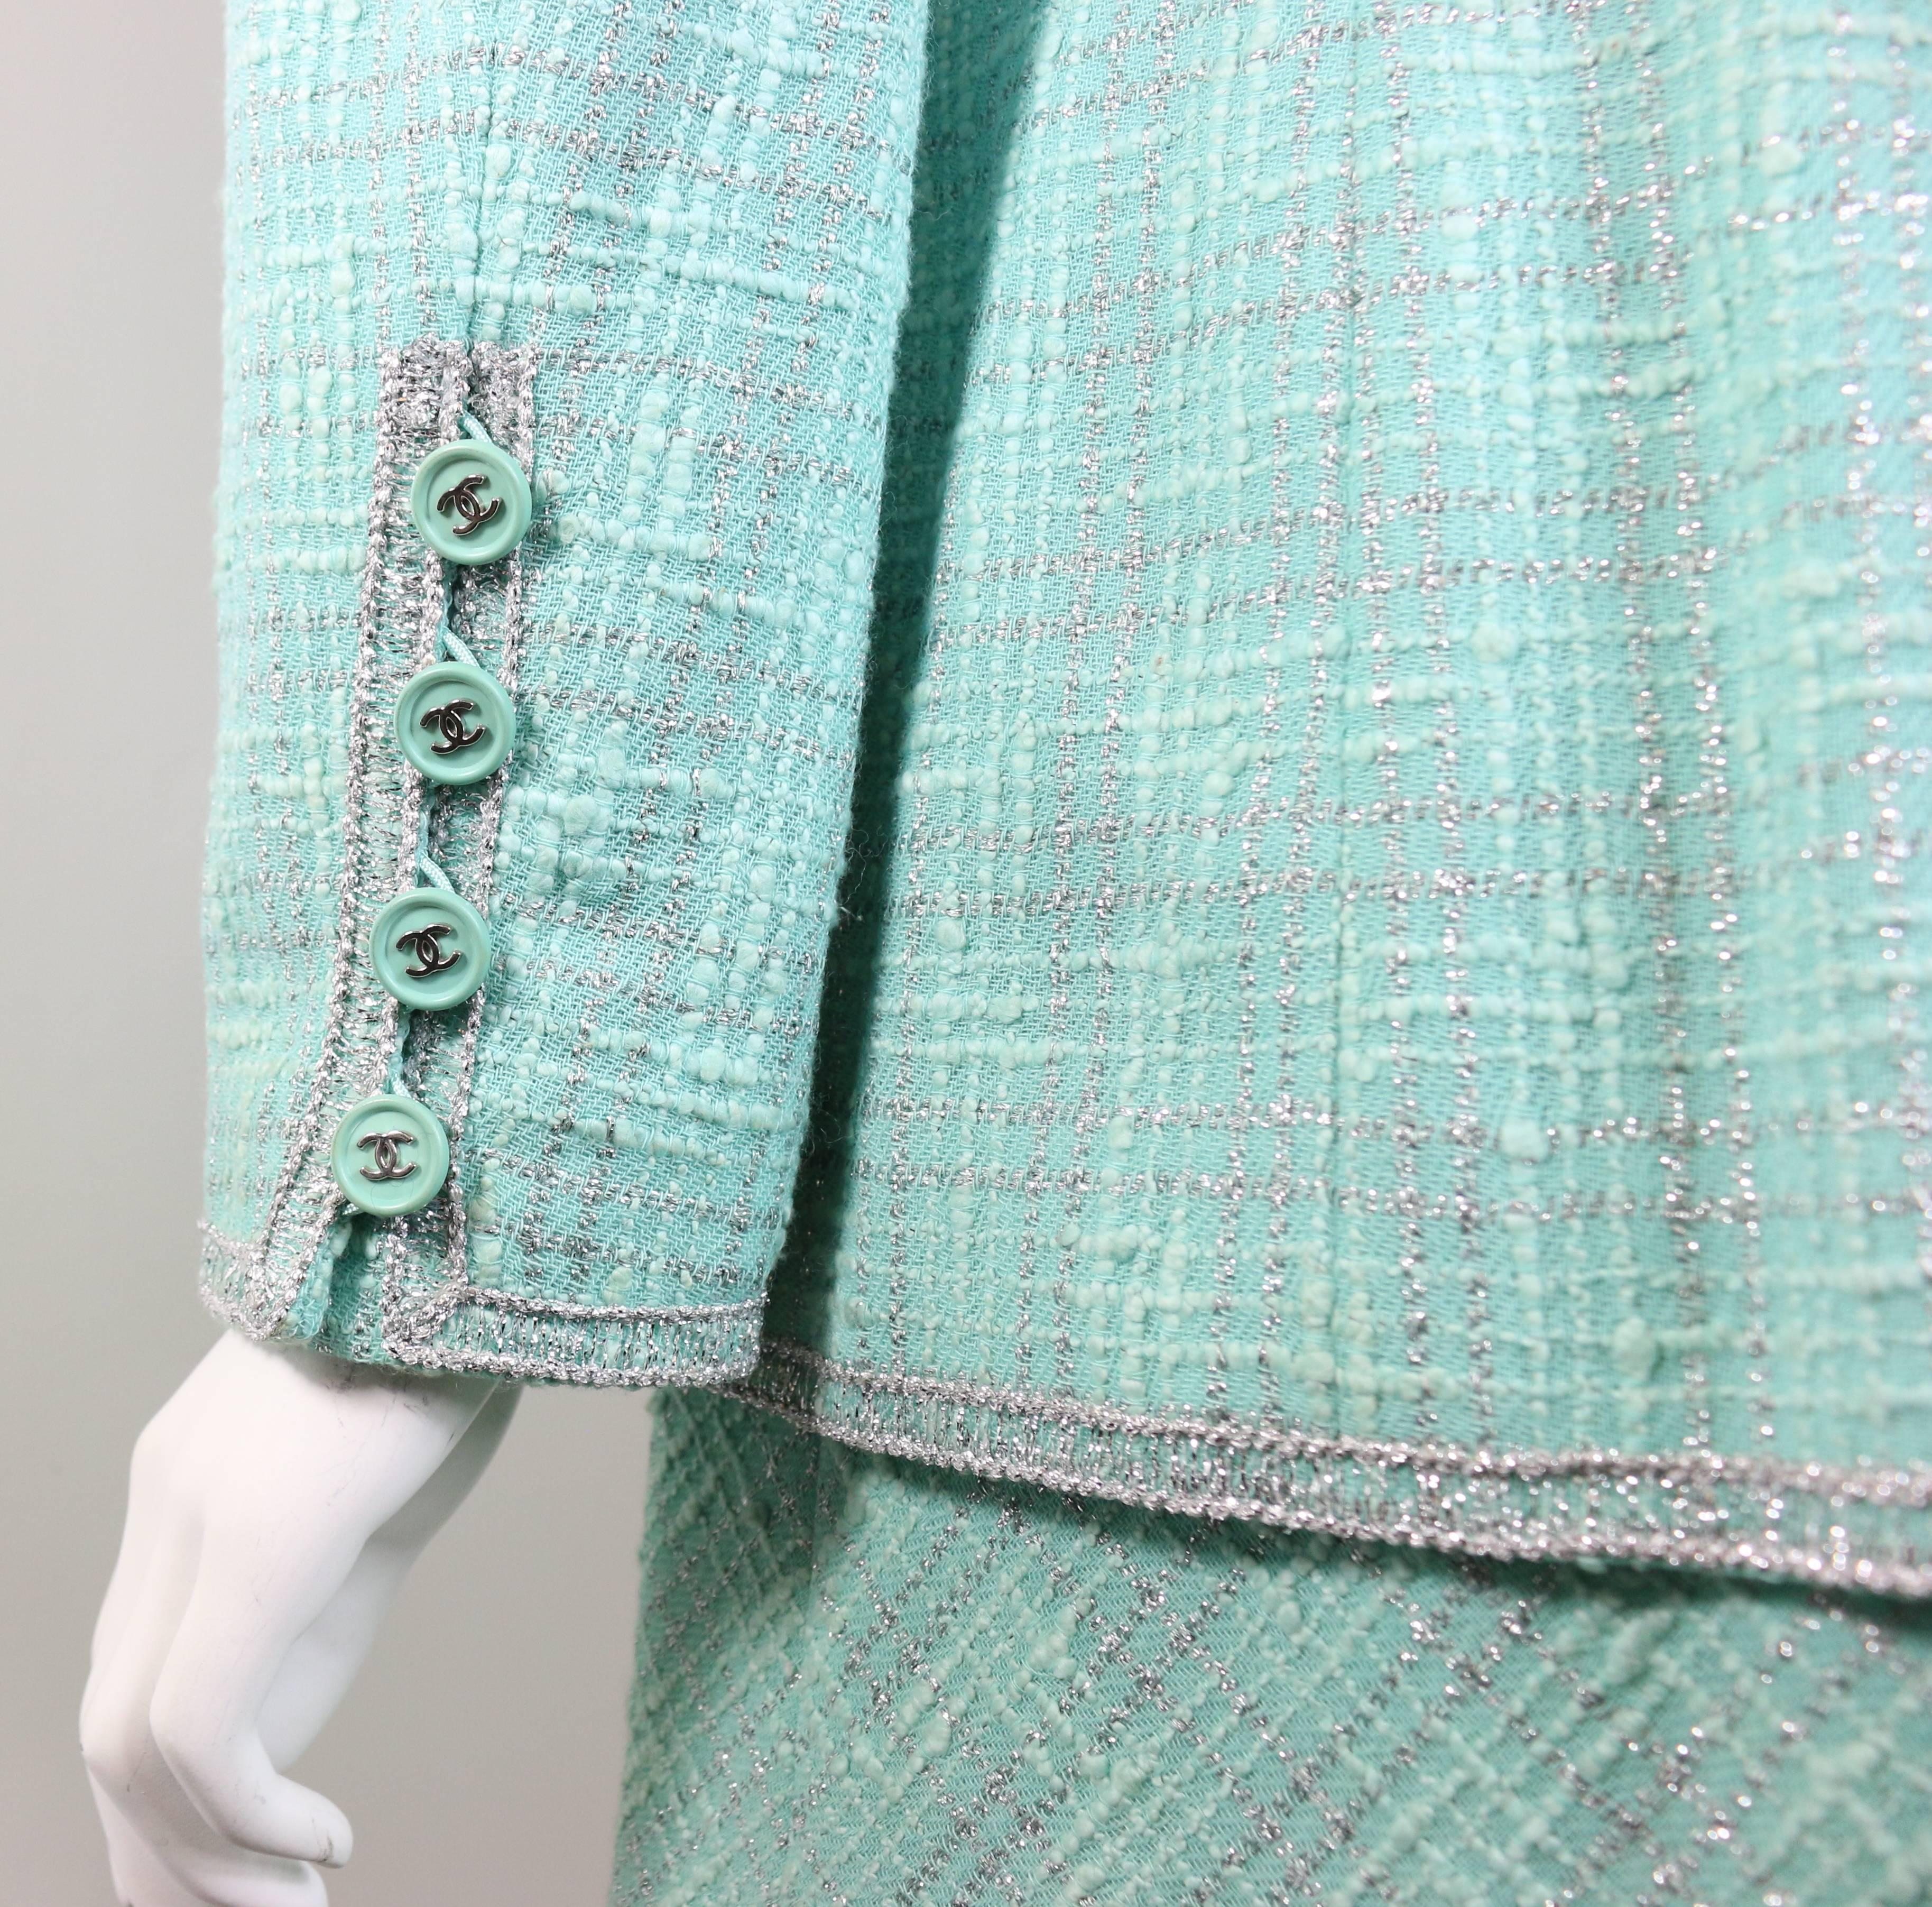 - Chanel green/silver tweed dress suit ensemble from 1997 pre-collection. 

- This jacket is an open front jacket and round neck design.

- Double vent on front. 

- 45%Wool, 38%Cotton, 15%Metal, 29%Nylon. Lining: 100%Silk

- Jacket Height: